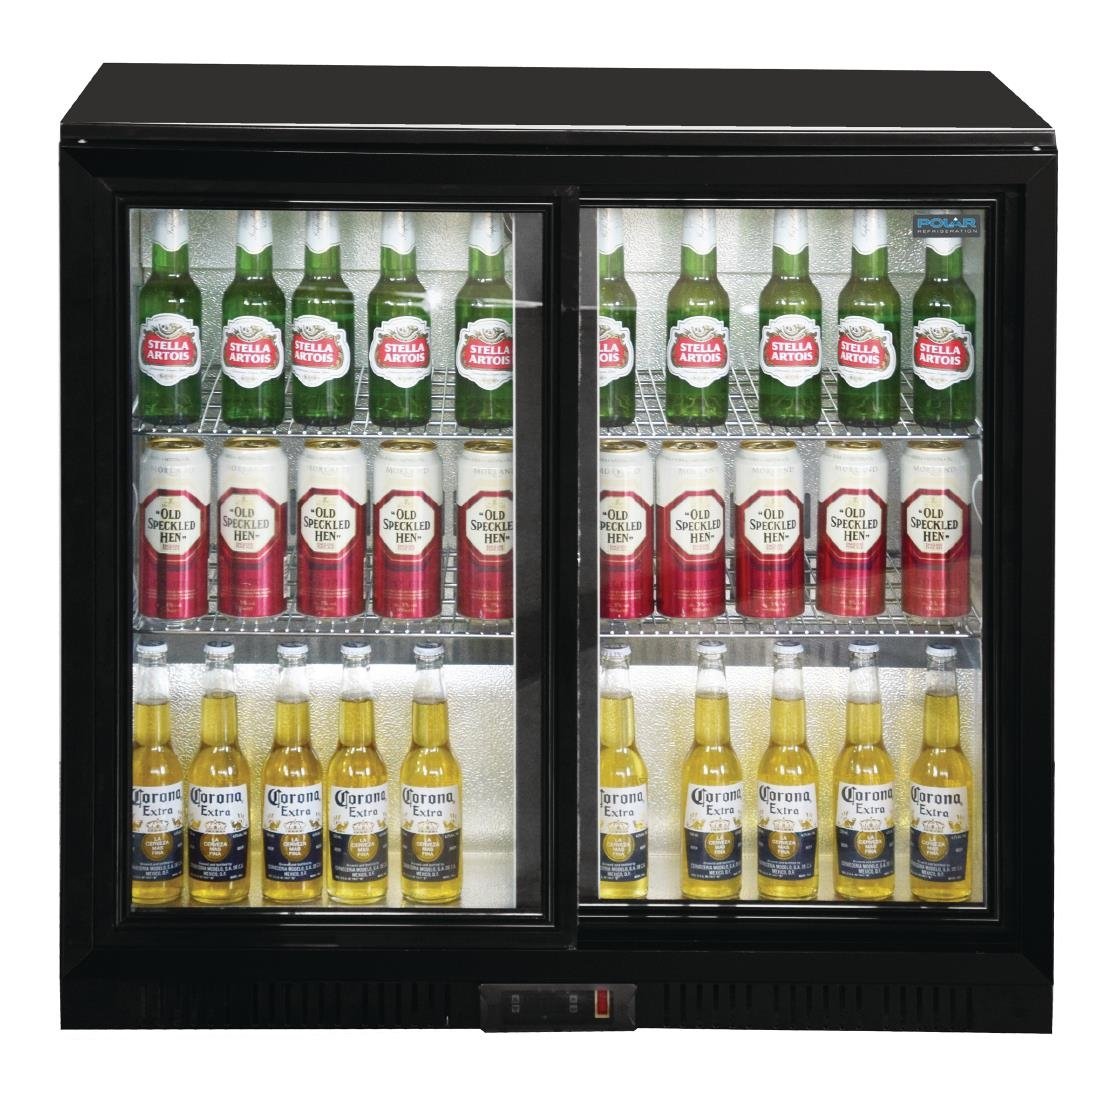 Polar G-Series Under Counter Back Bar Cooler with Hinged Doors 198Ltr